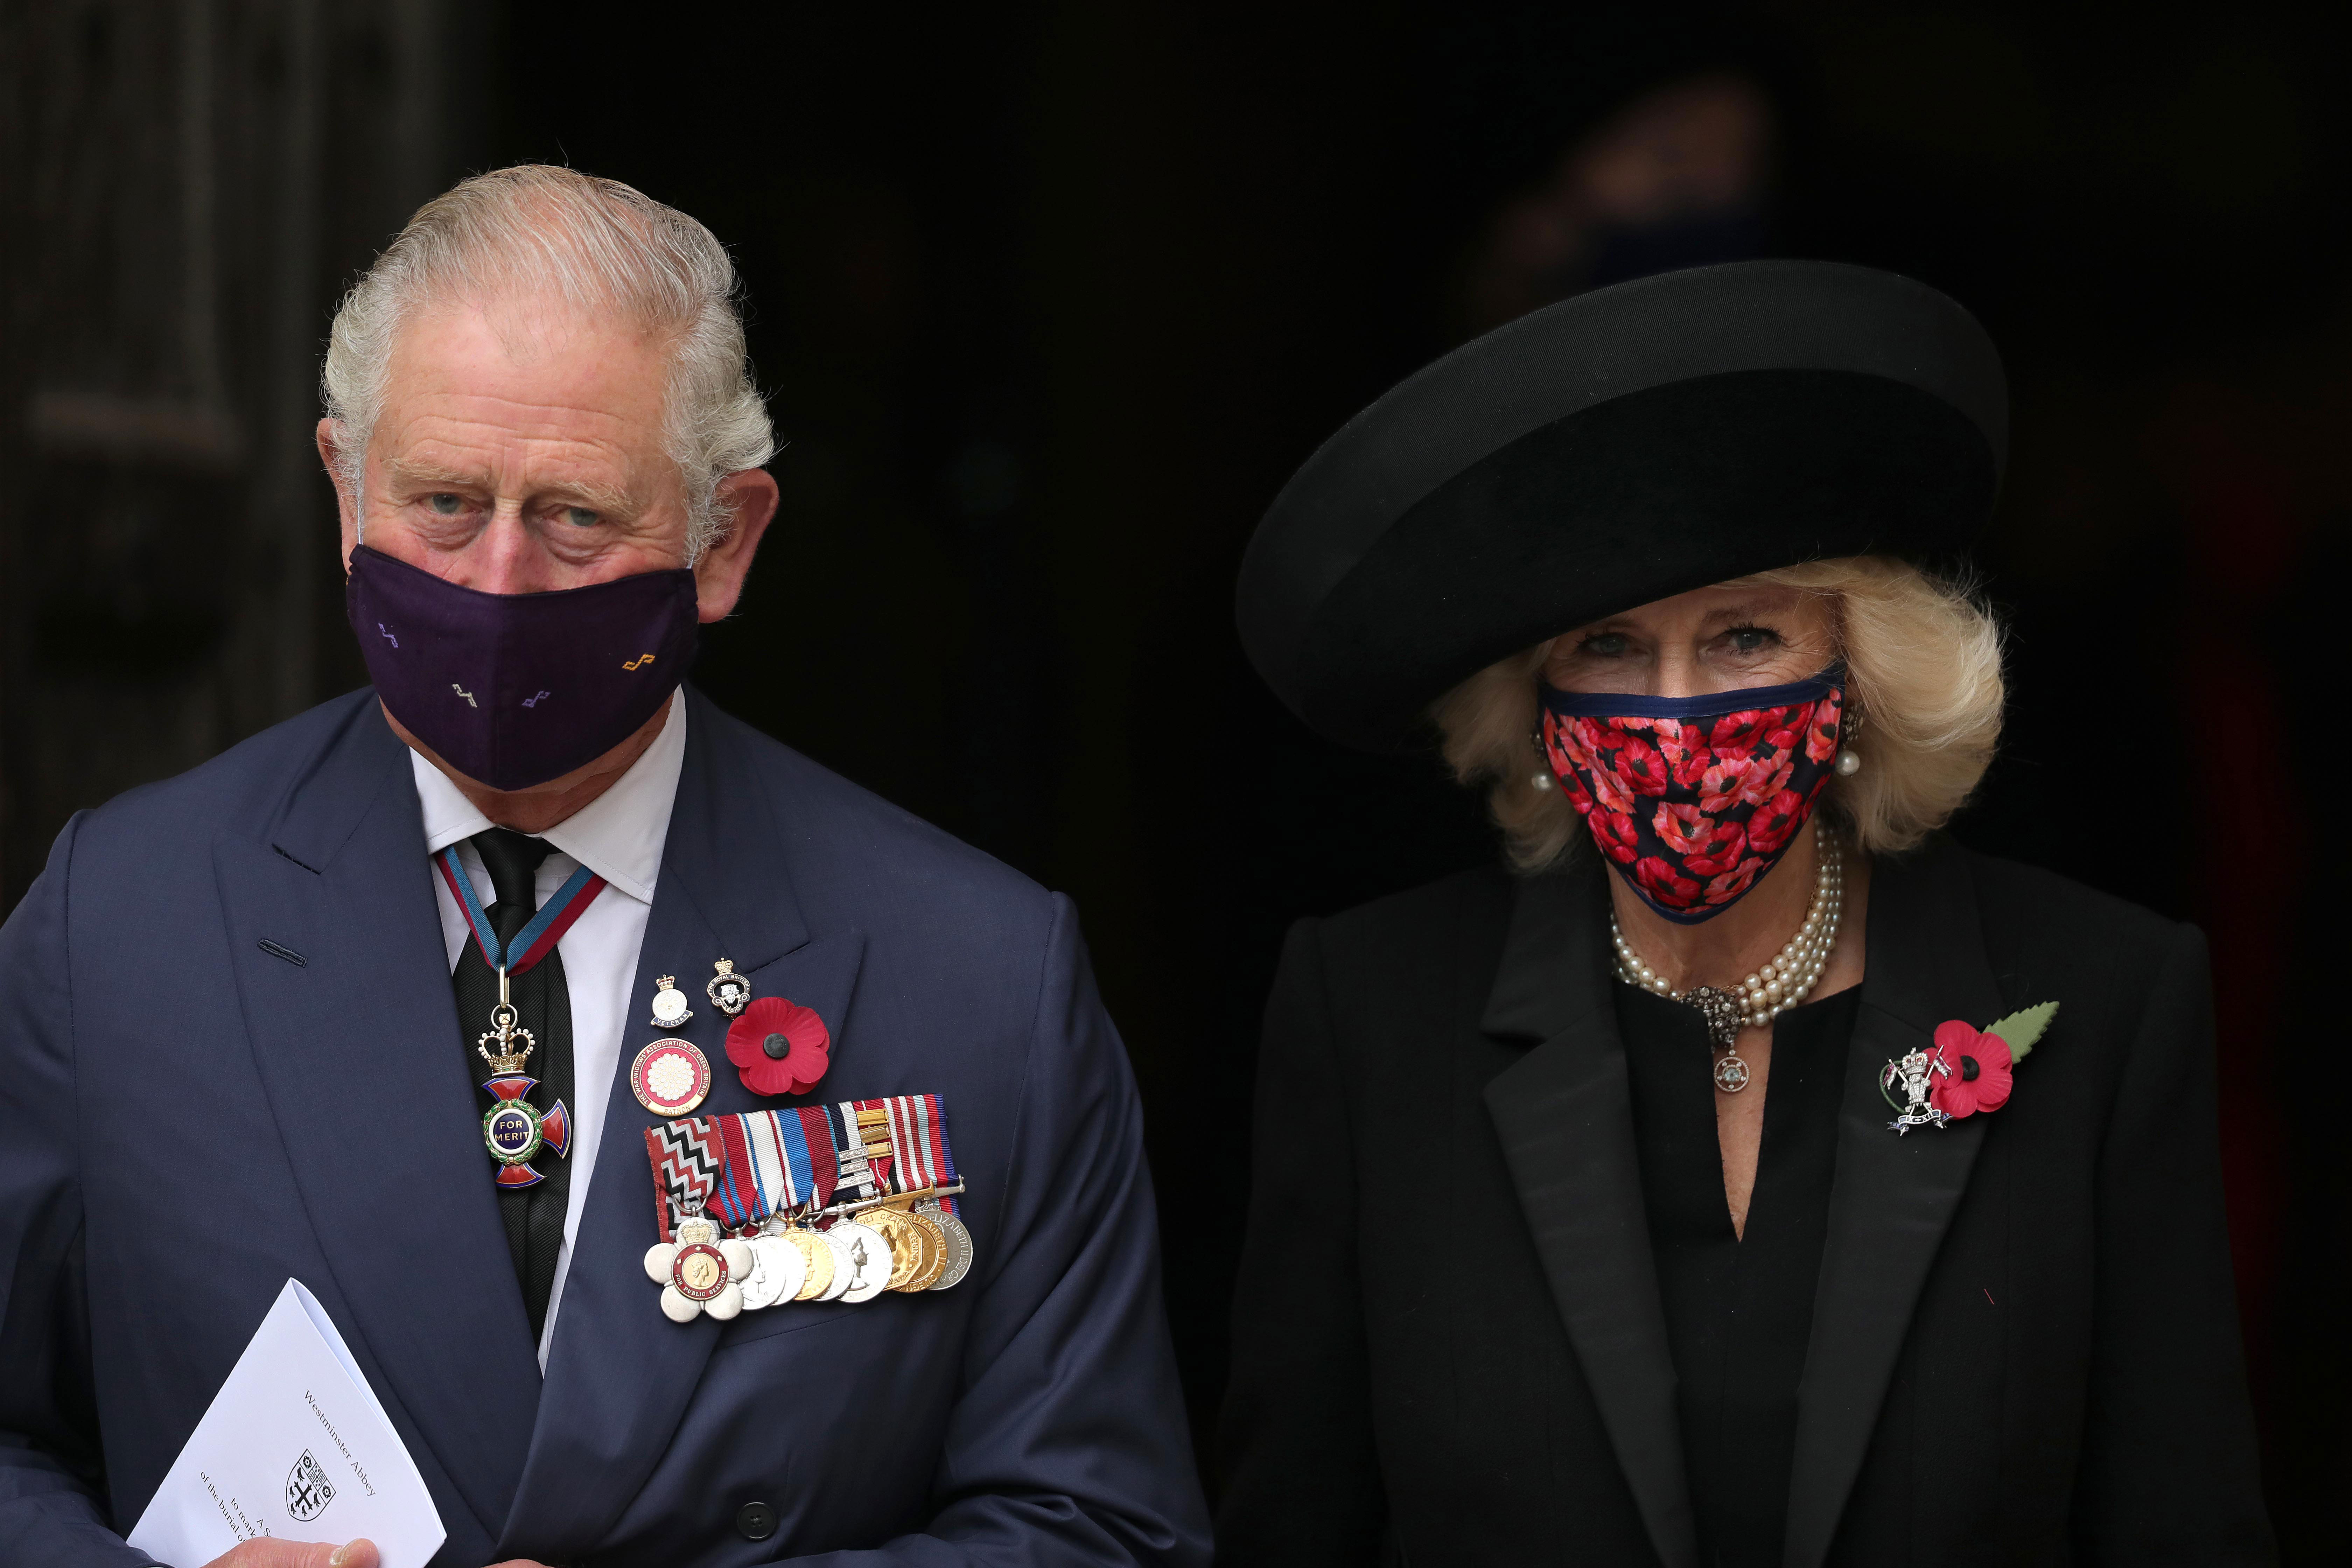 Prince Charles and Camilla, Duchess of Cornwall, leave Westminster Abbey in London after attending an Armistice Day service and the centenary of the burial of the Unknown Warrior in November 2020.